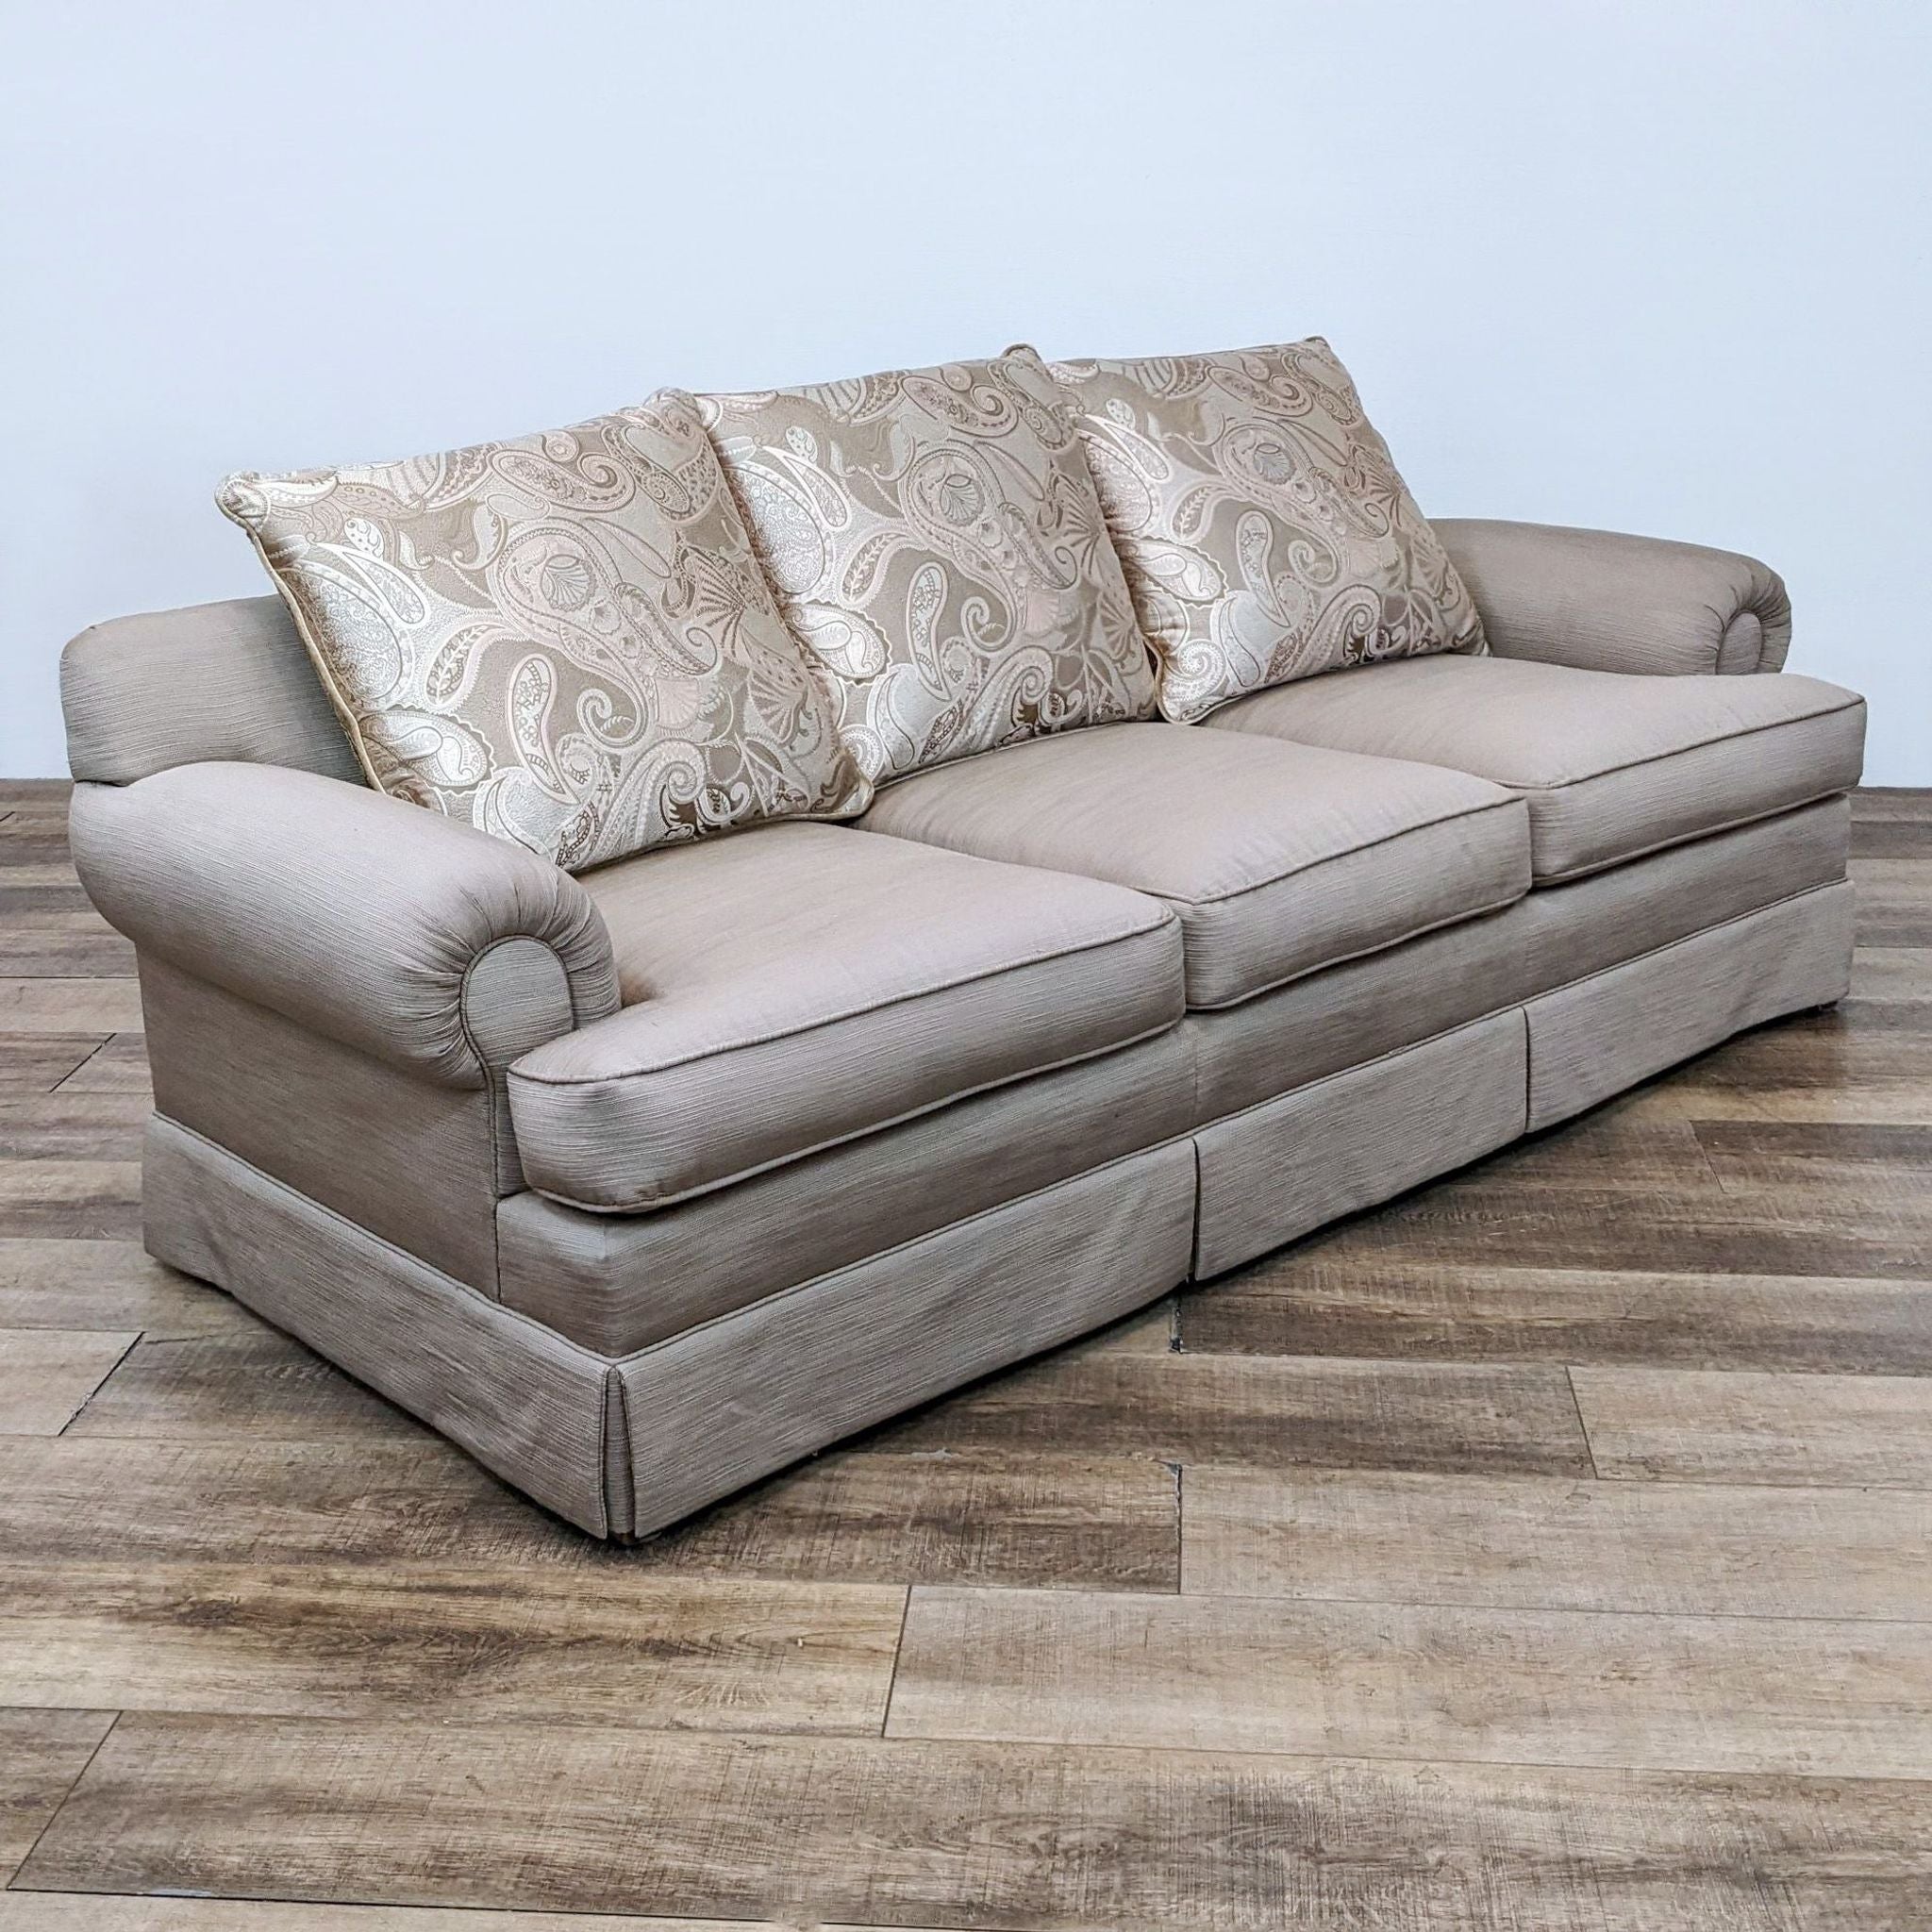 Front view of beige Reperch fabric sofa with three decorative back cushions.